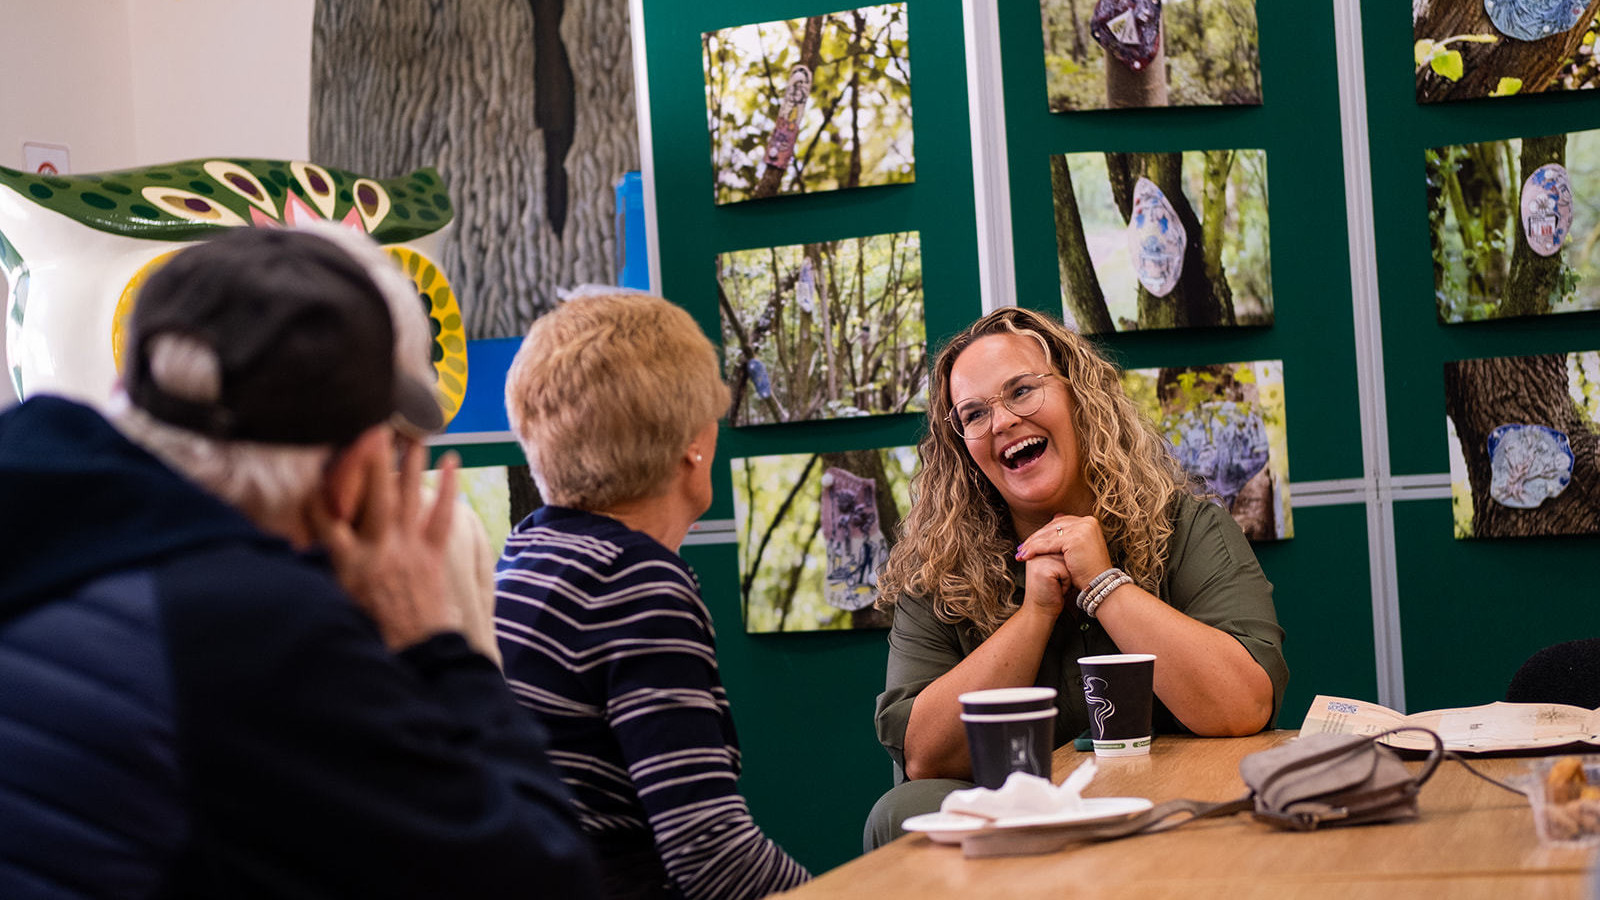 A woman with blonde curly hair and round glasses laughs whilst in conversation with an elderly couple. Behind them are photographs of Frances Disley’s sculpture trail ‘Following the Roots’ in Halewood Park.